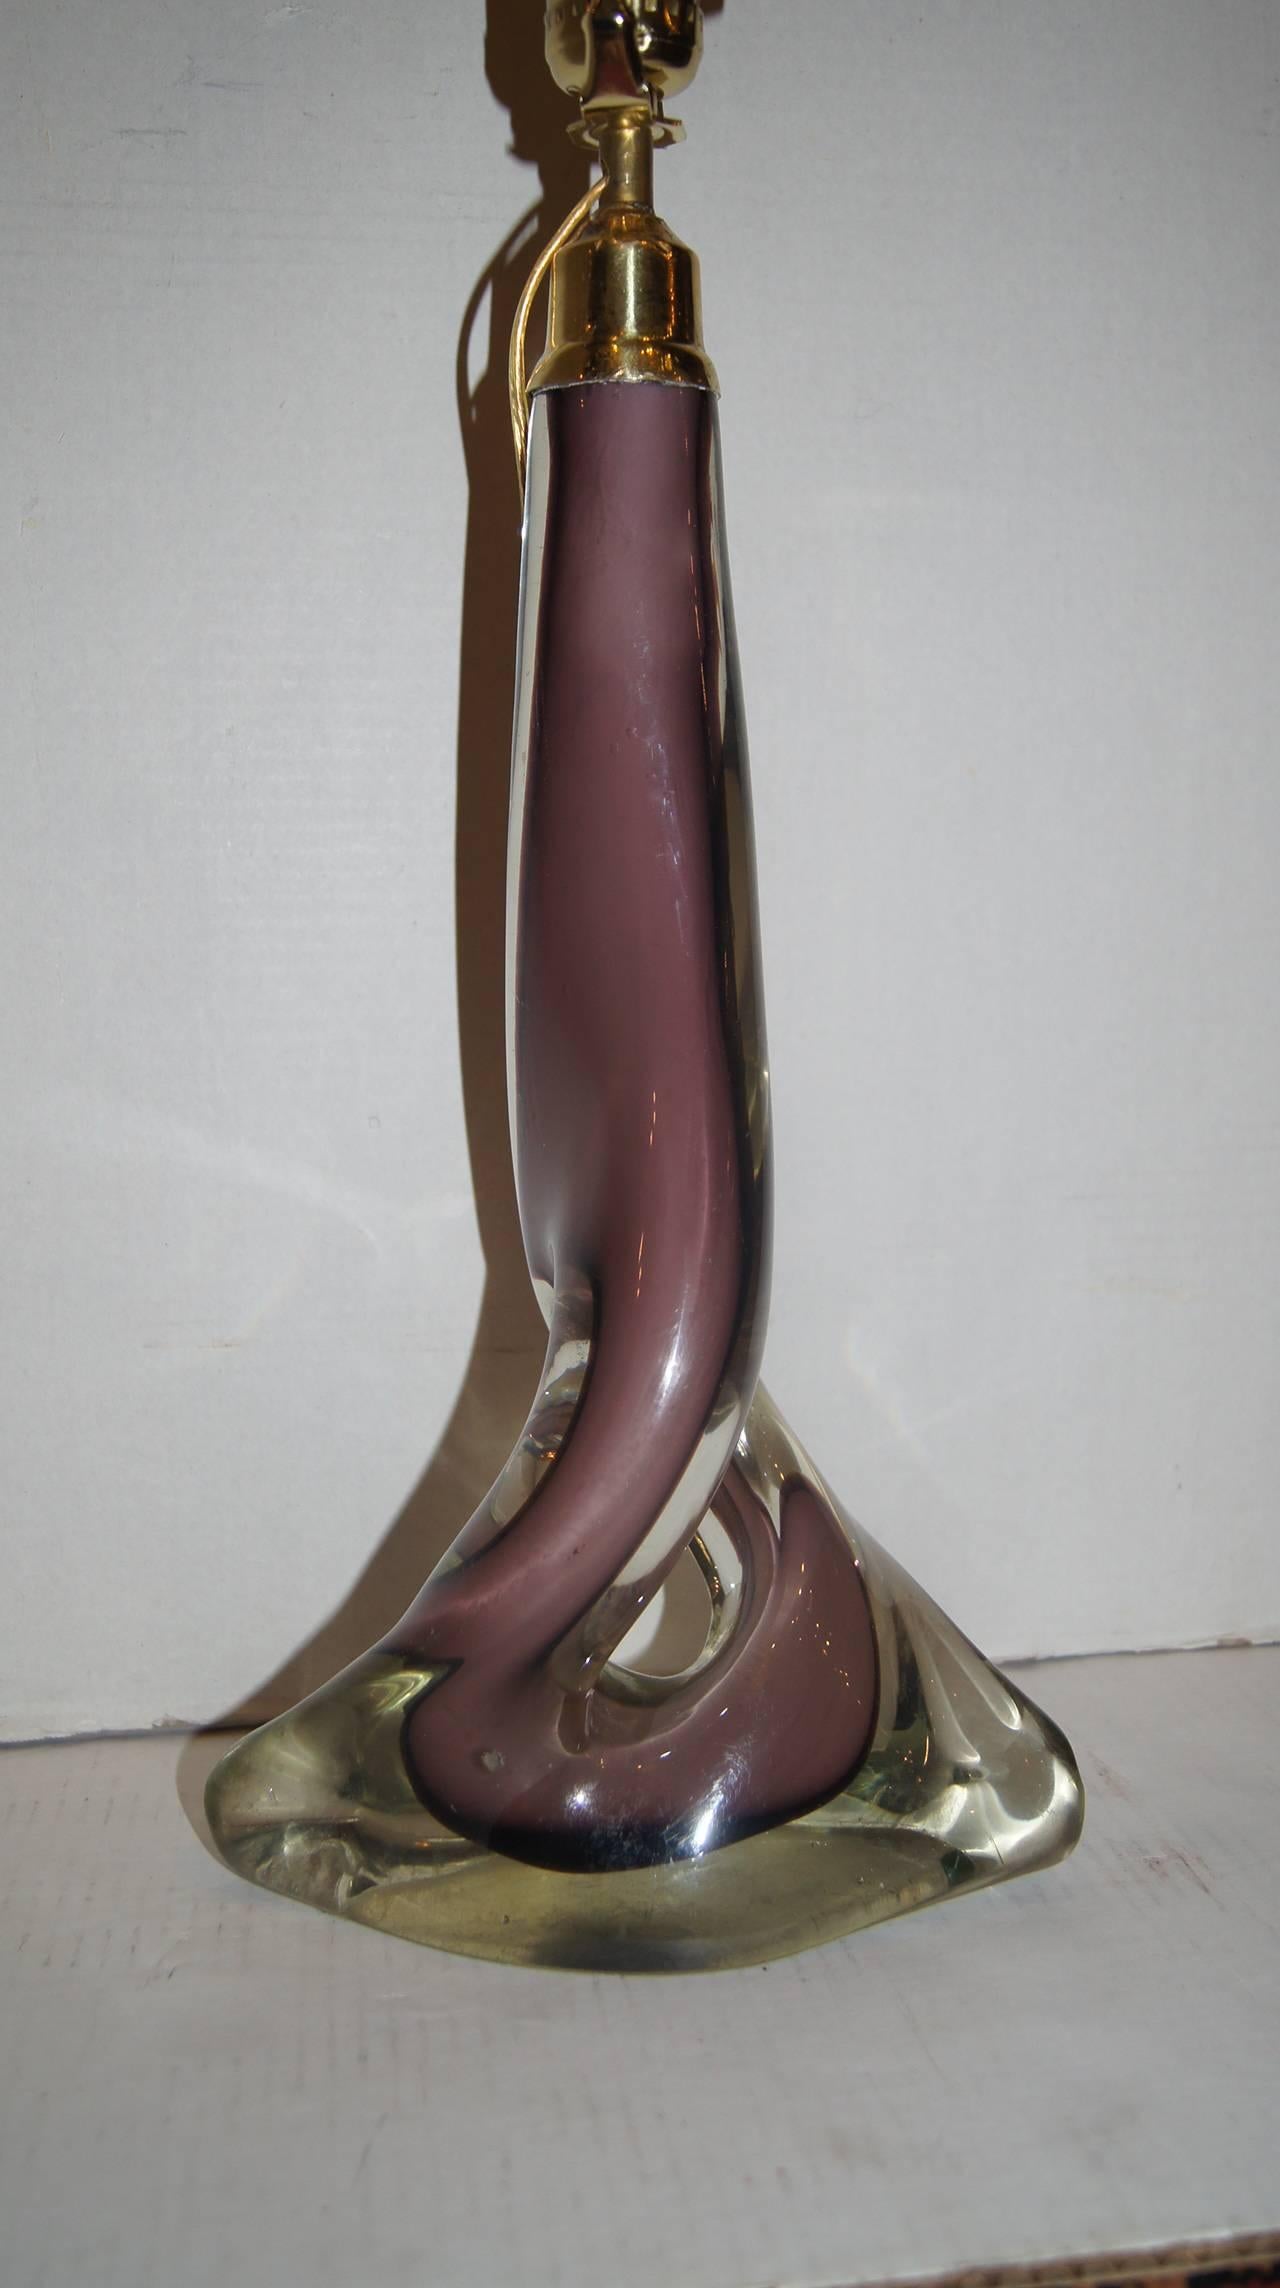 A Midcentury single Murano, amethyst to clear glass lamp. Very nice sculptural shaped body. Pristine condition, rewired.

Measurements:
Height of body only: 16